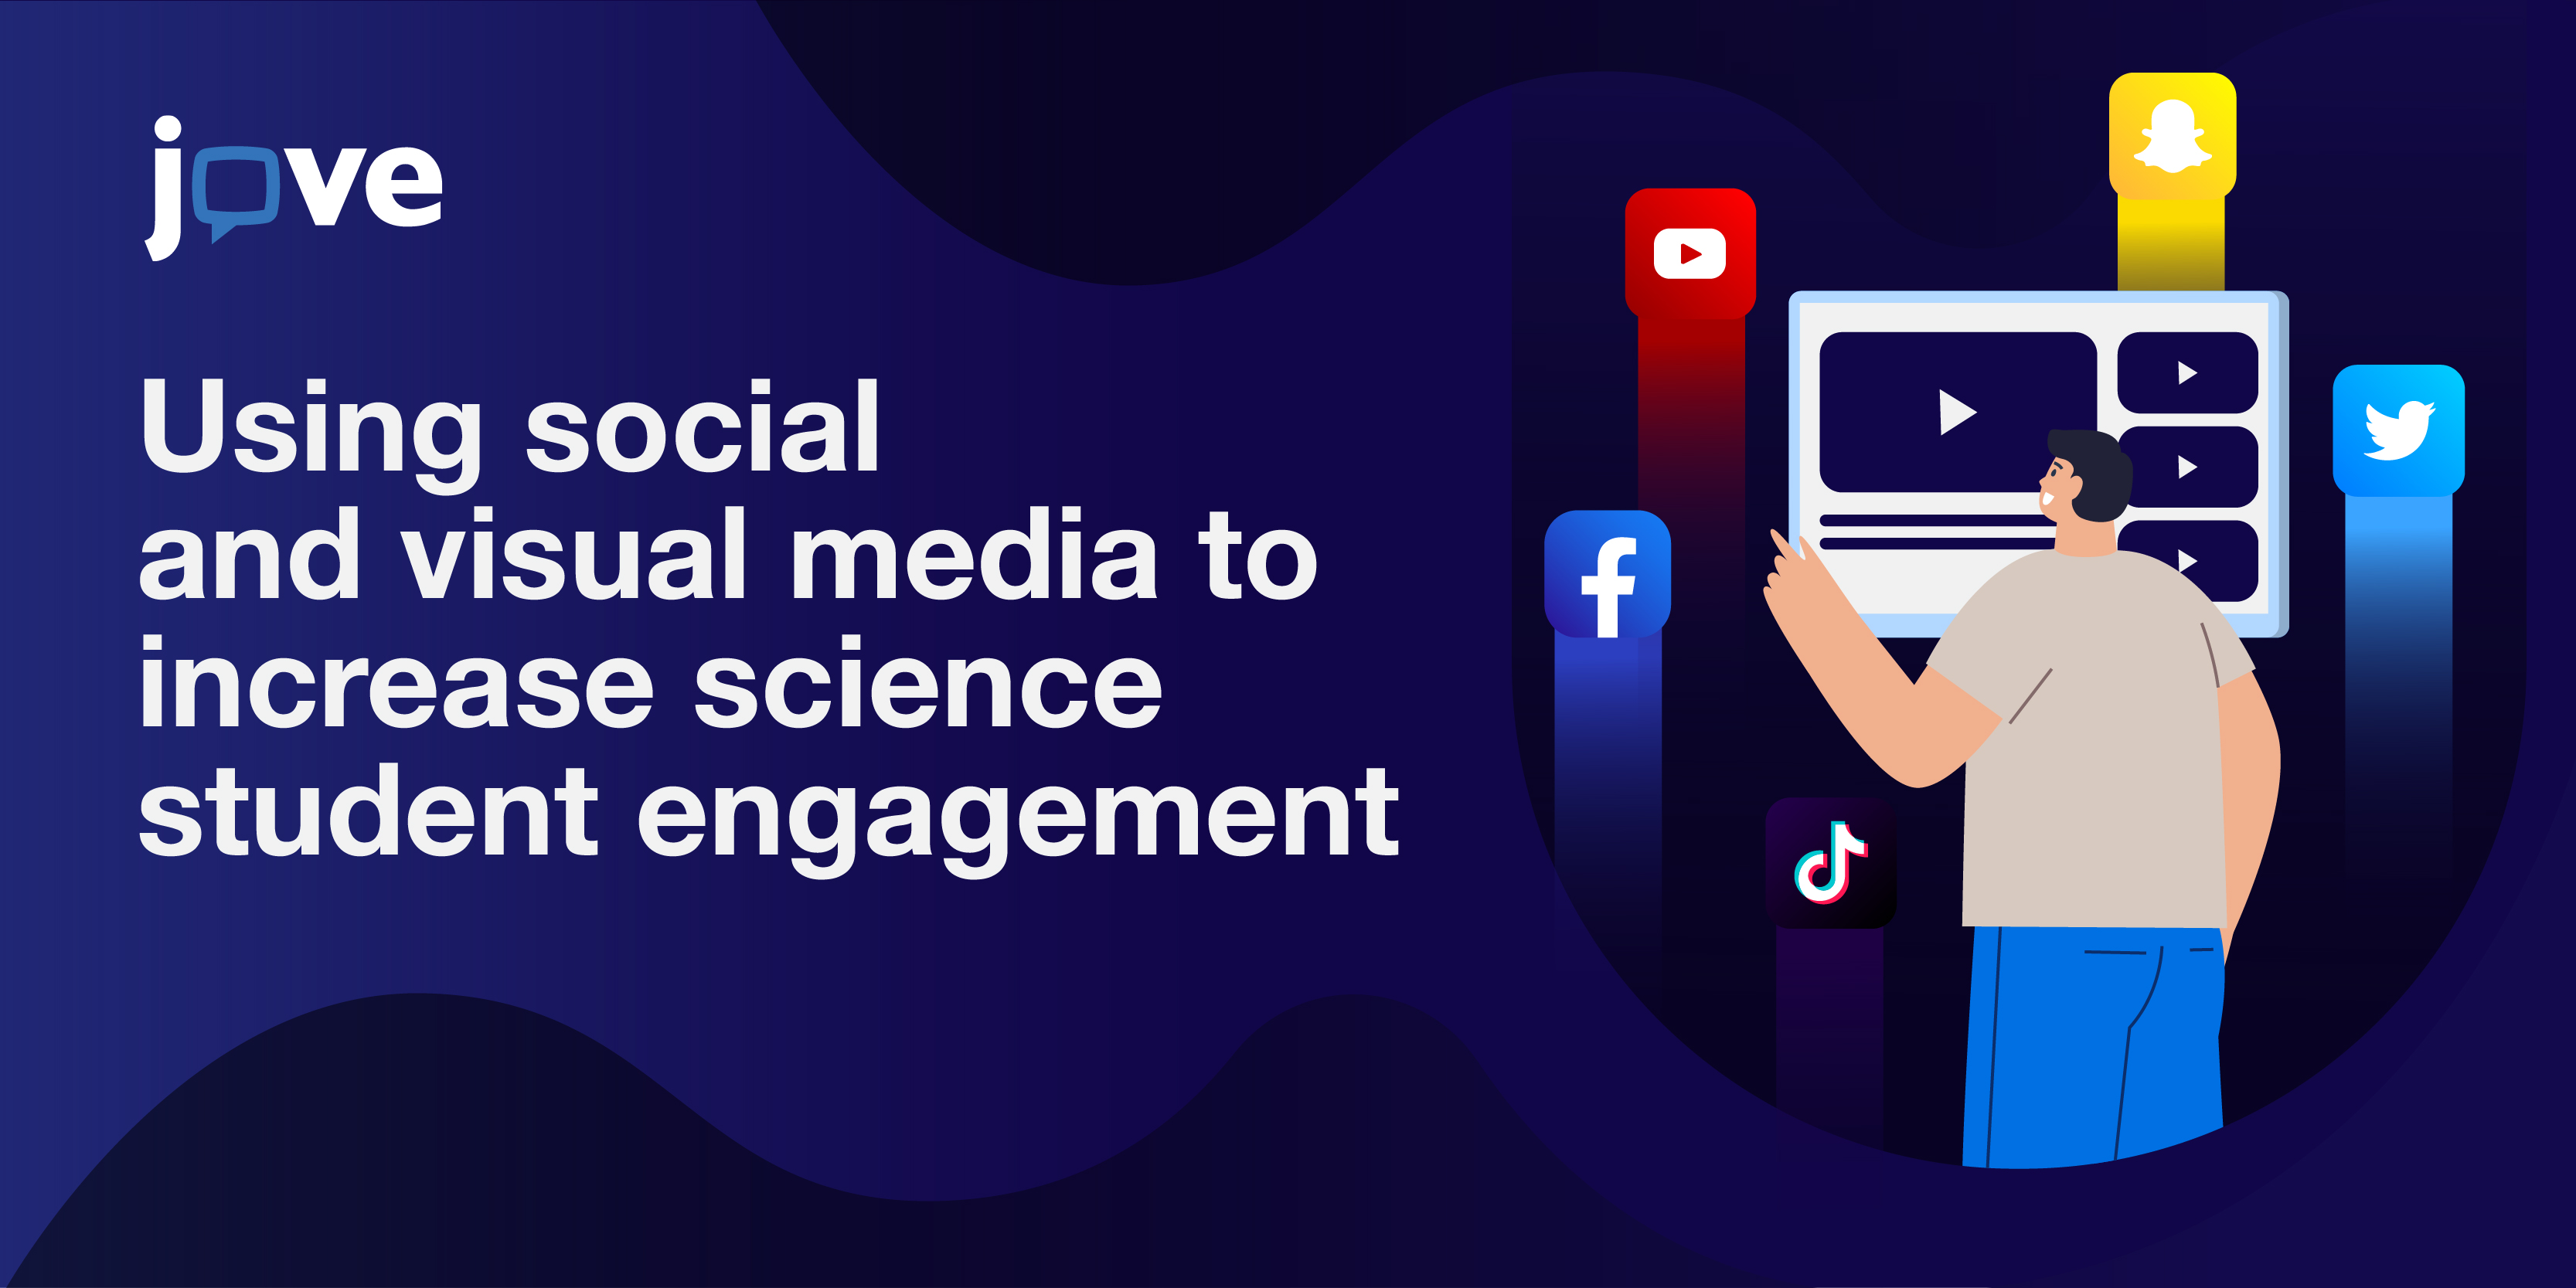 Using social and visual media to increase science student engagement